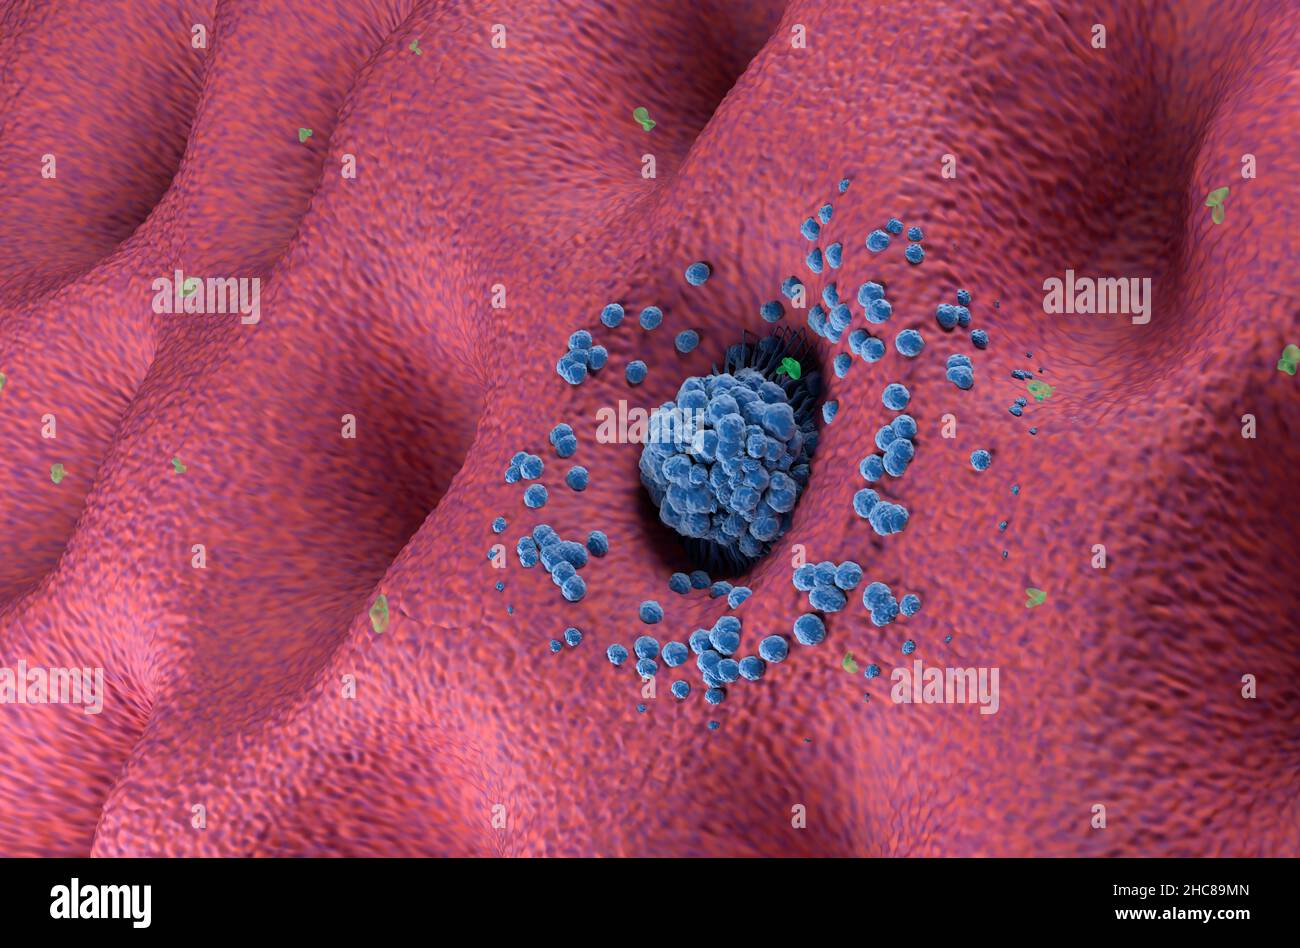 Early stage gastric cancer tumor on the stomach wall angle view 3d illustration Stock Photo